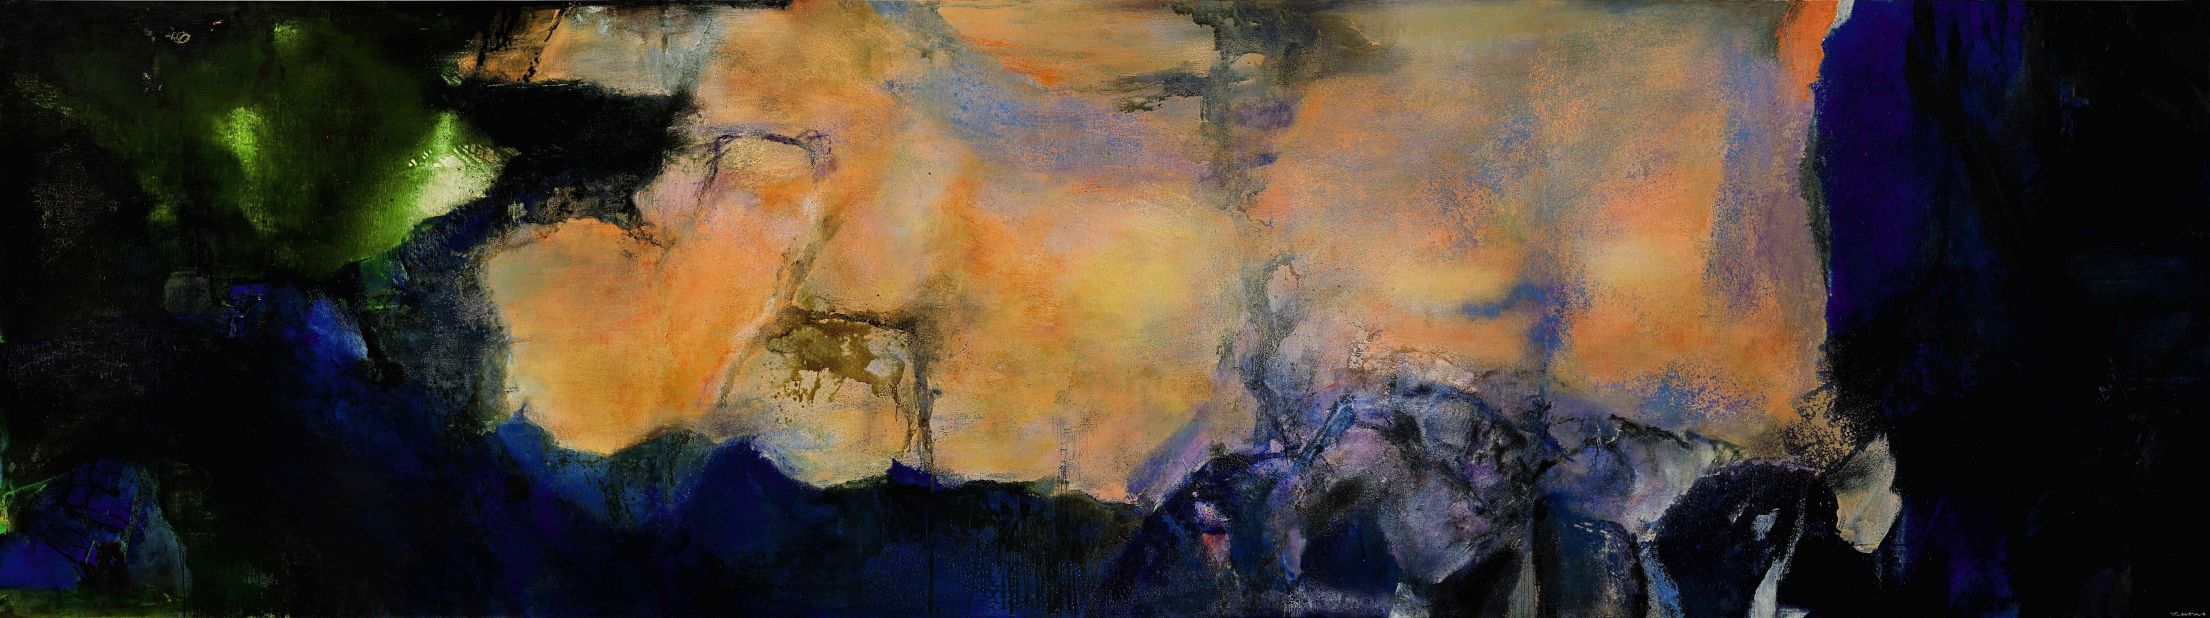 Zao Wou-Ki's abstract painting "Juin-Octobre 1985" has become the most expensive painting to ever sell at auction in Hong Kong.